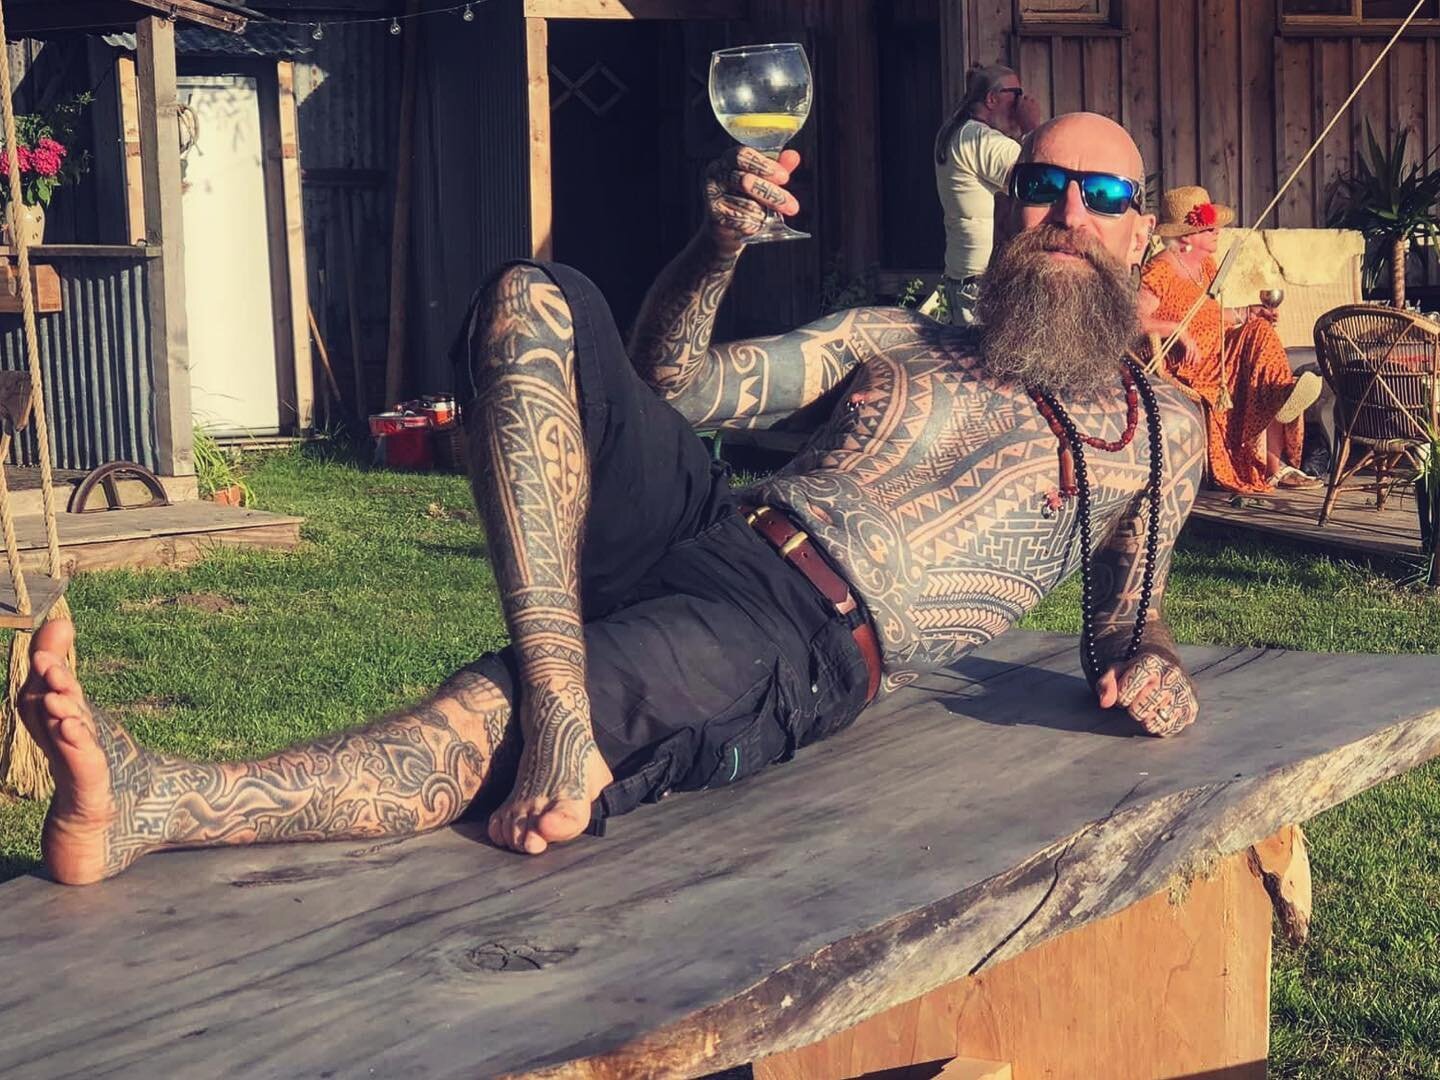 F R I D A Y S 

r e l a x &bull; r e c h a r g e &bull; 
&bull; c i n  c i n ! &bull;

Mr Neil Bass @_tattoofx showing us how to do Fridays in style ... and an unconventional but sporting use of the Camp Mela outside dining table!

Thoroughly loved h